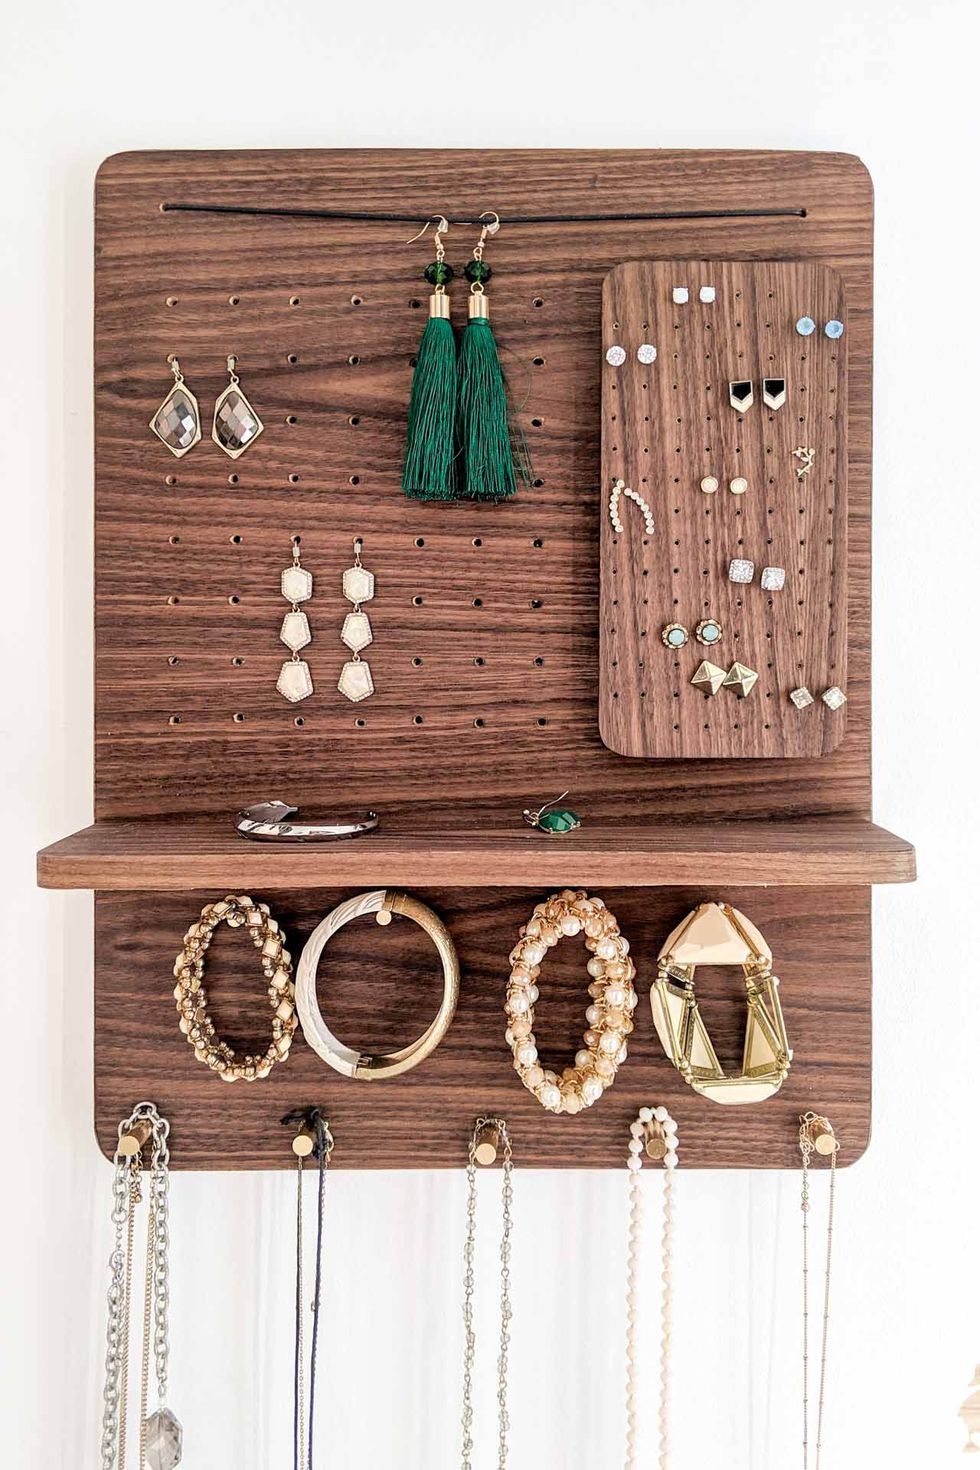 7 Clever DIY Earring Holder Ideas to Organize Your Earrings